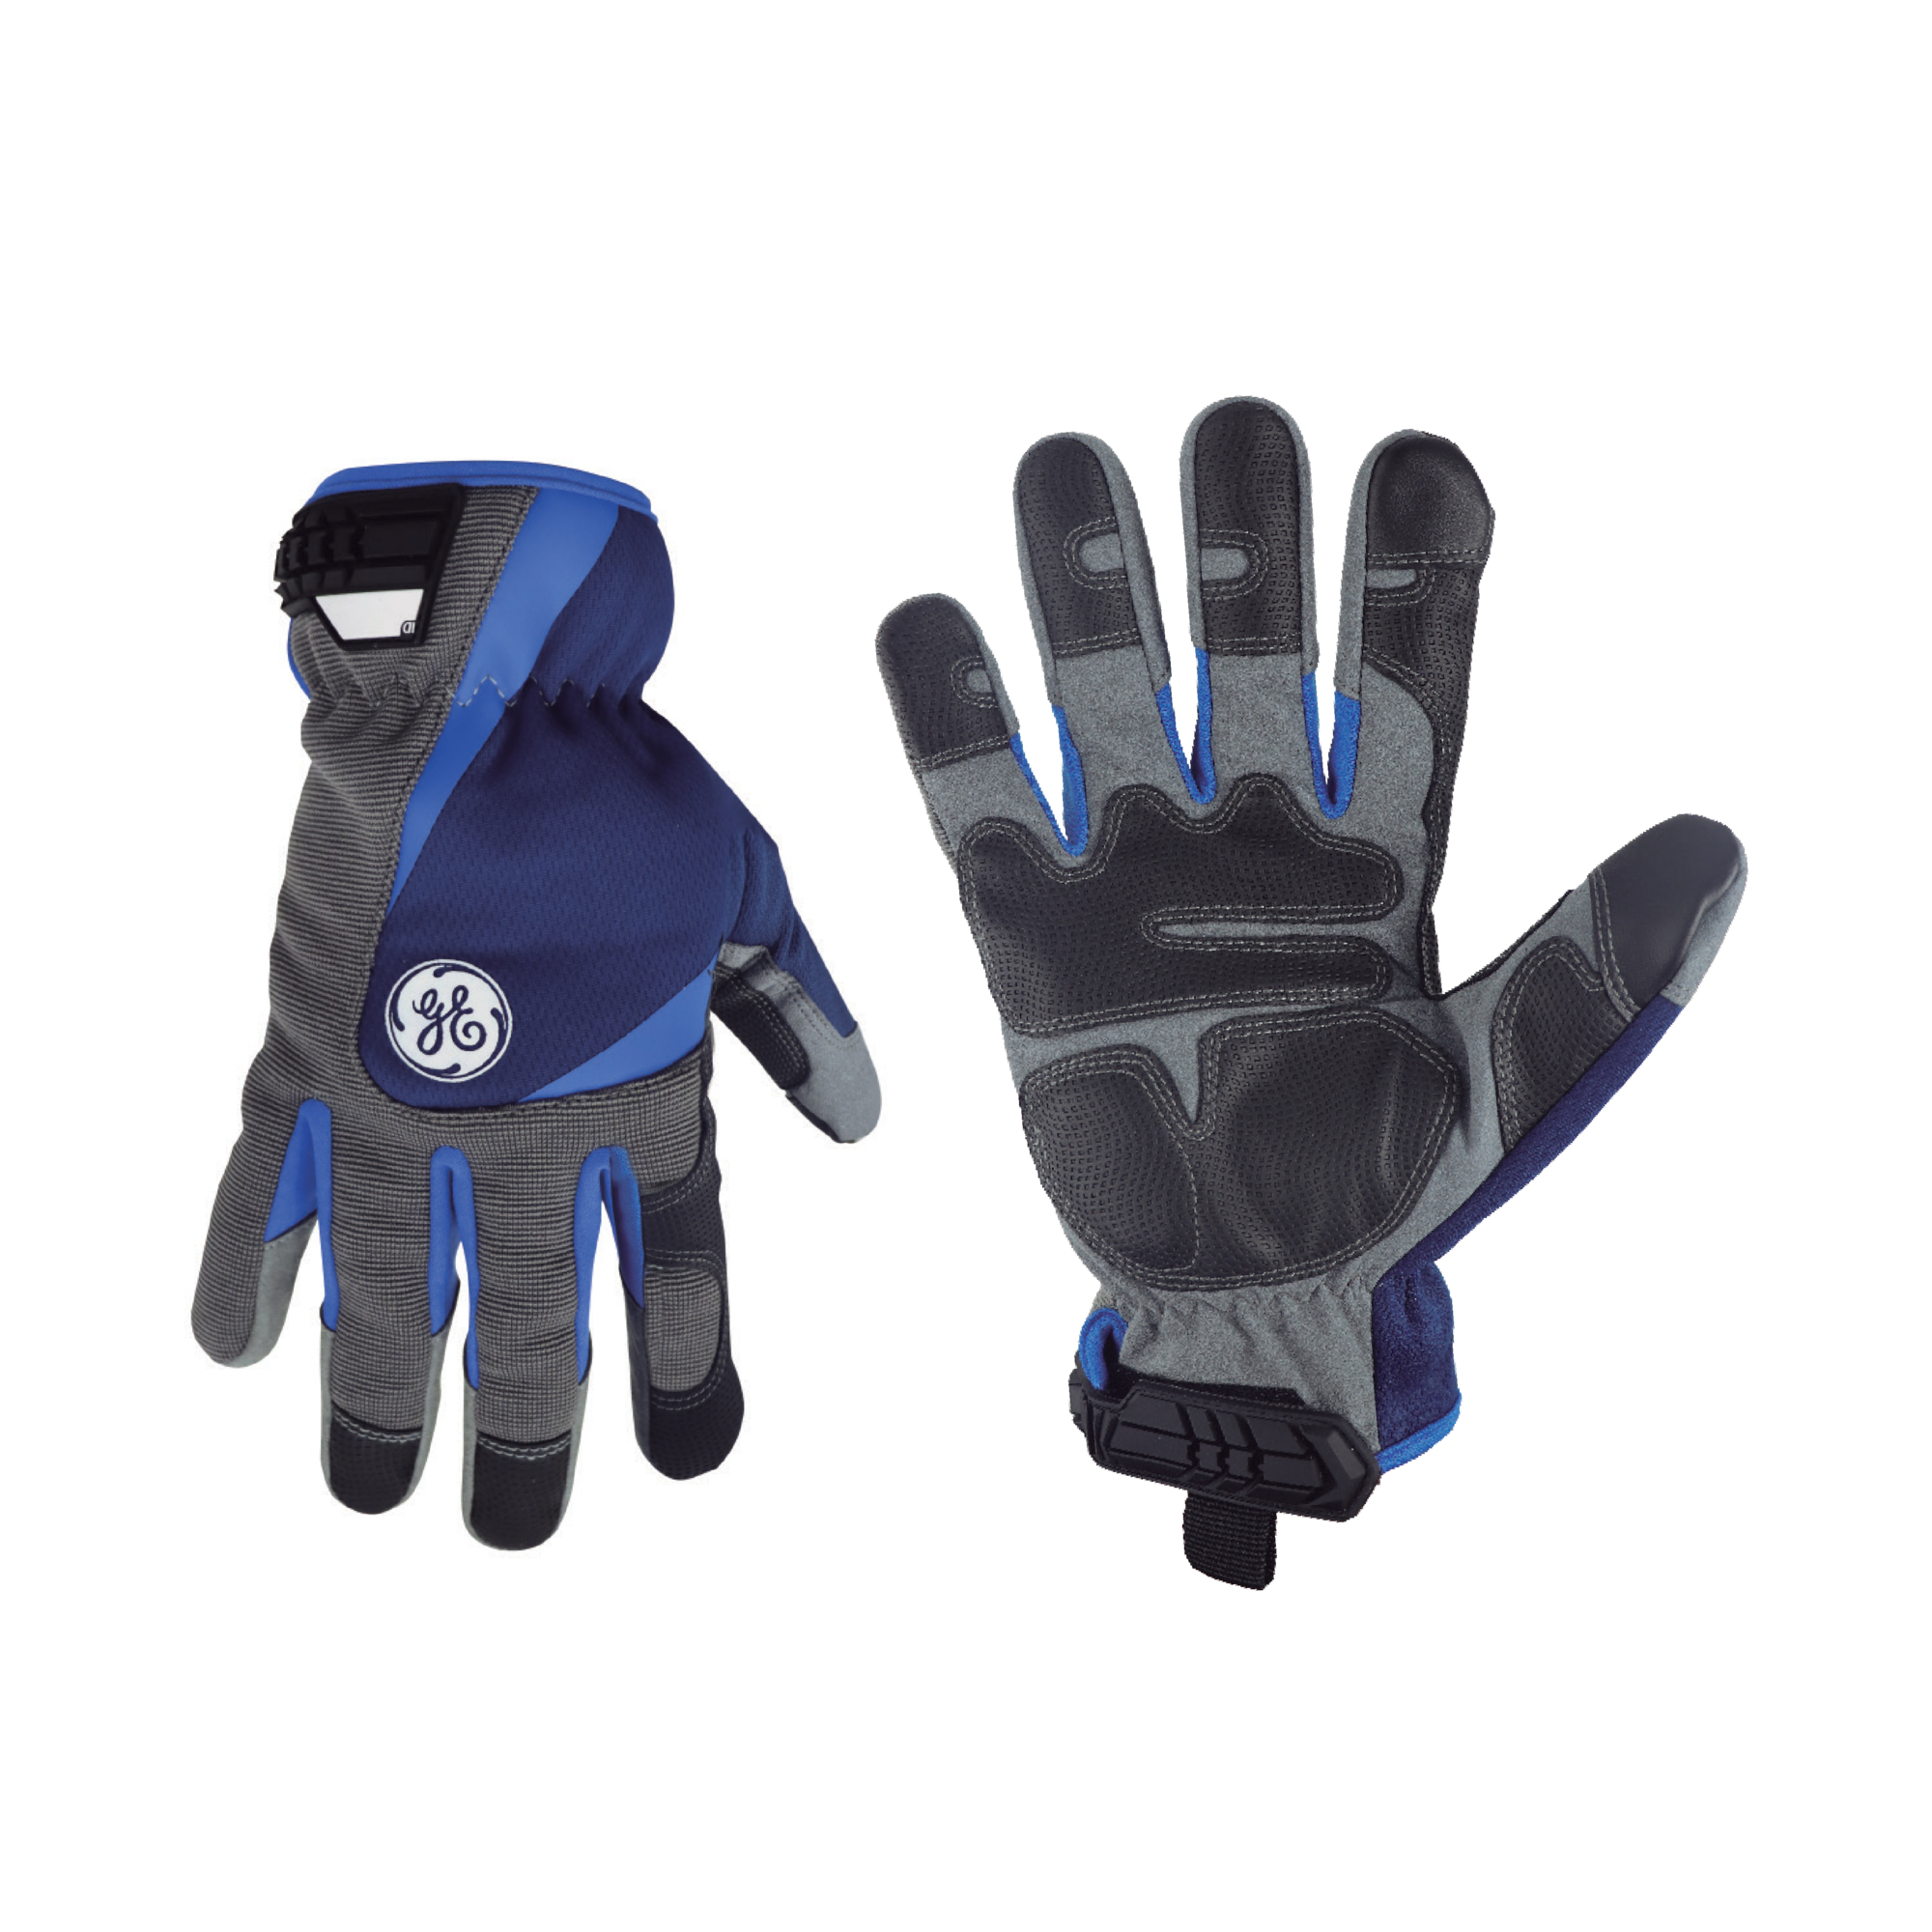 General Electric, Mechanic's Glove Multicolor XL 1 pair, Size XL, Included (qty.) 1, Model GG411XLC